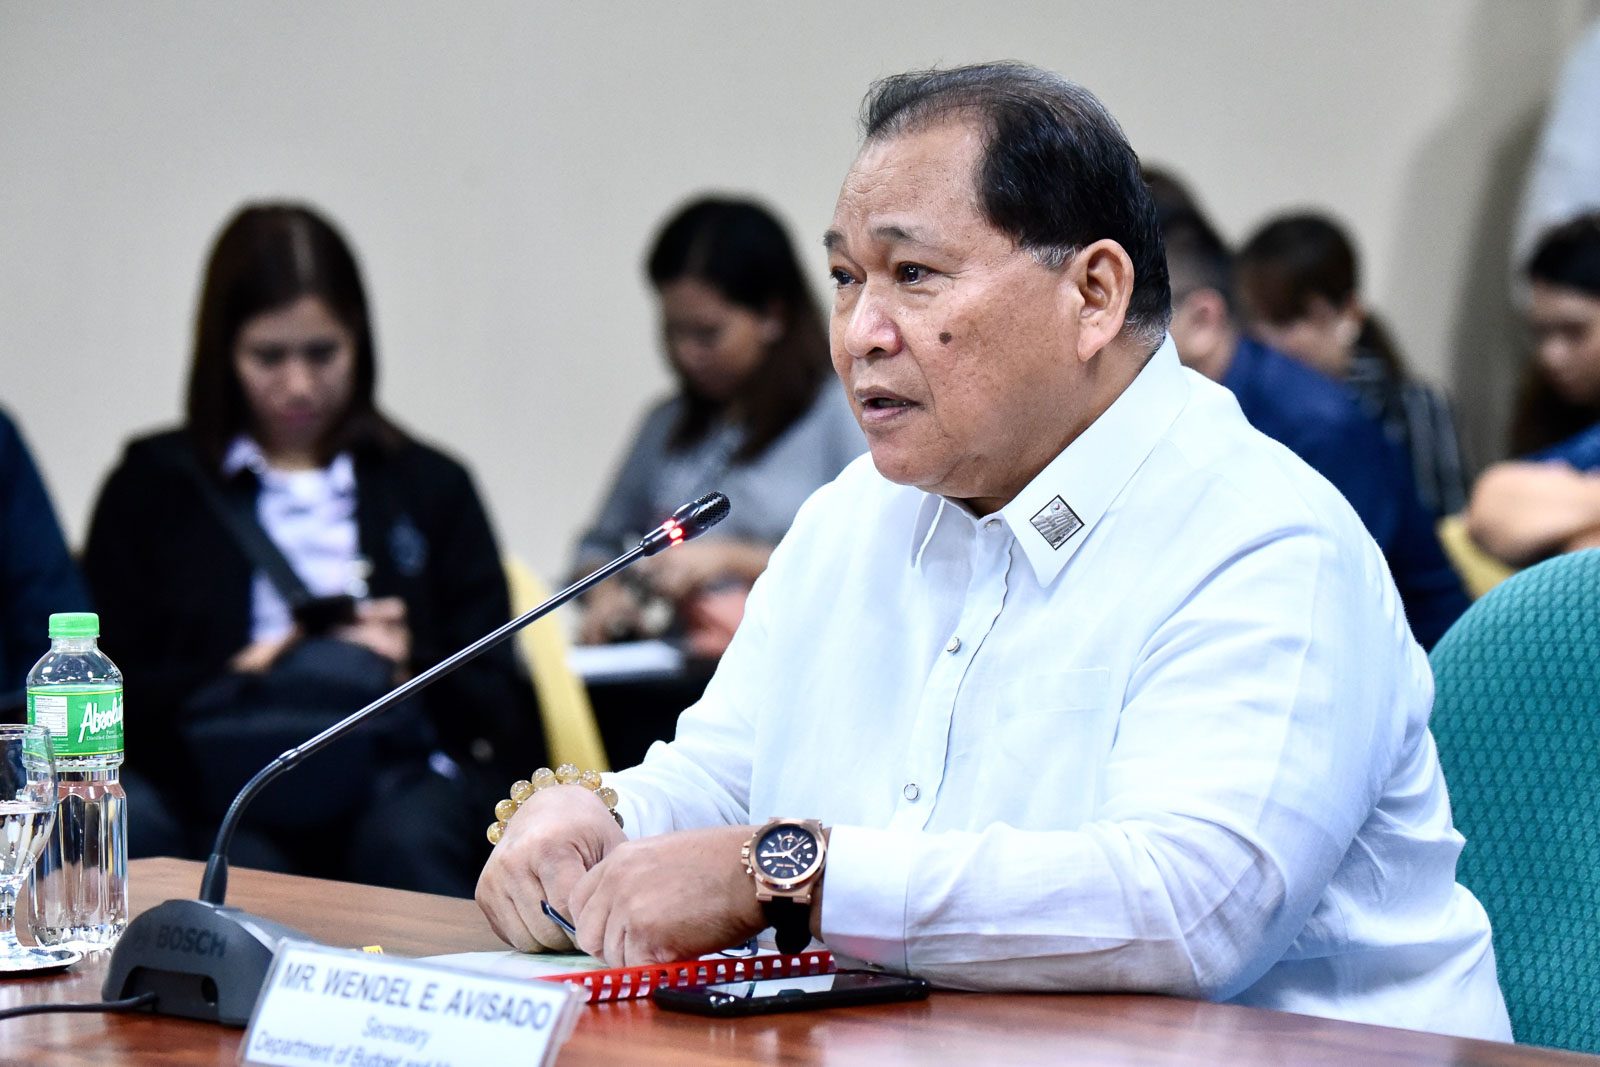 DBM chief Avisado on sick leave ahead of 2022 budget submission